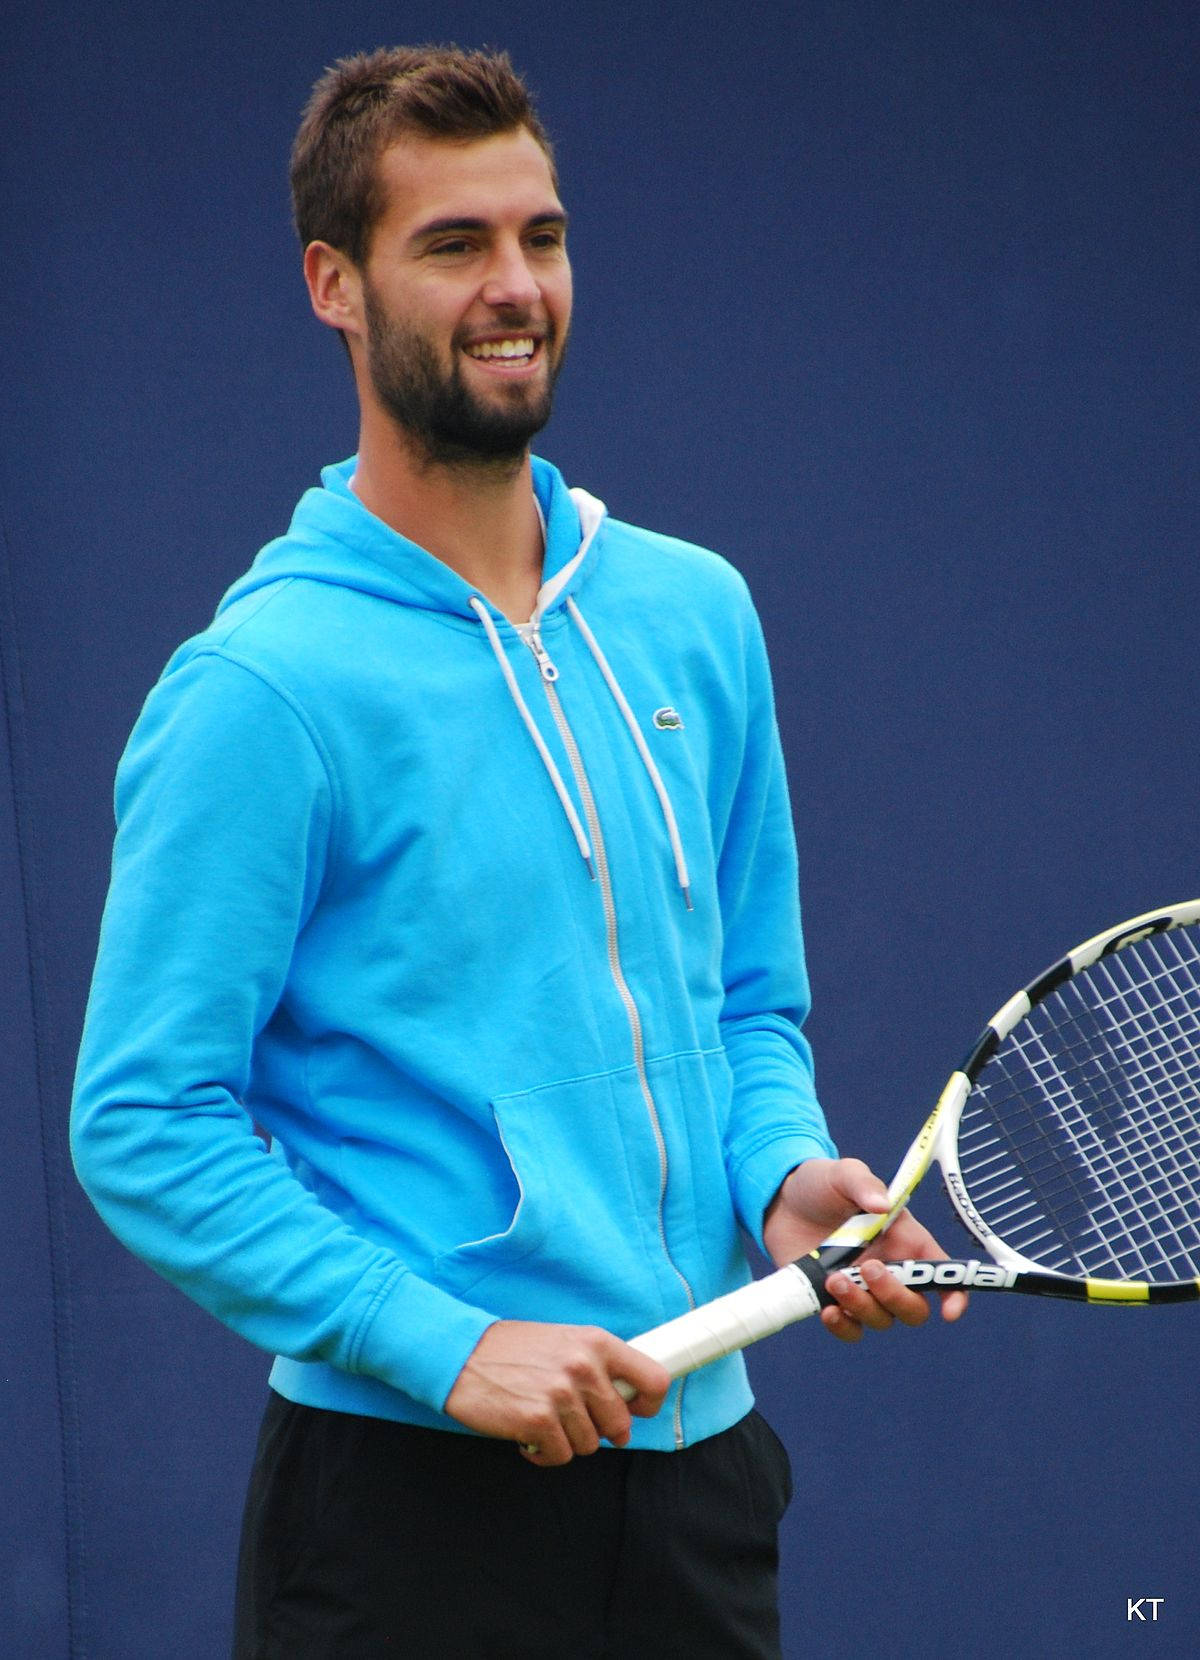 Benoit Paire Smiling While Holding Racket Wallpaper